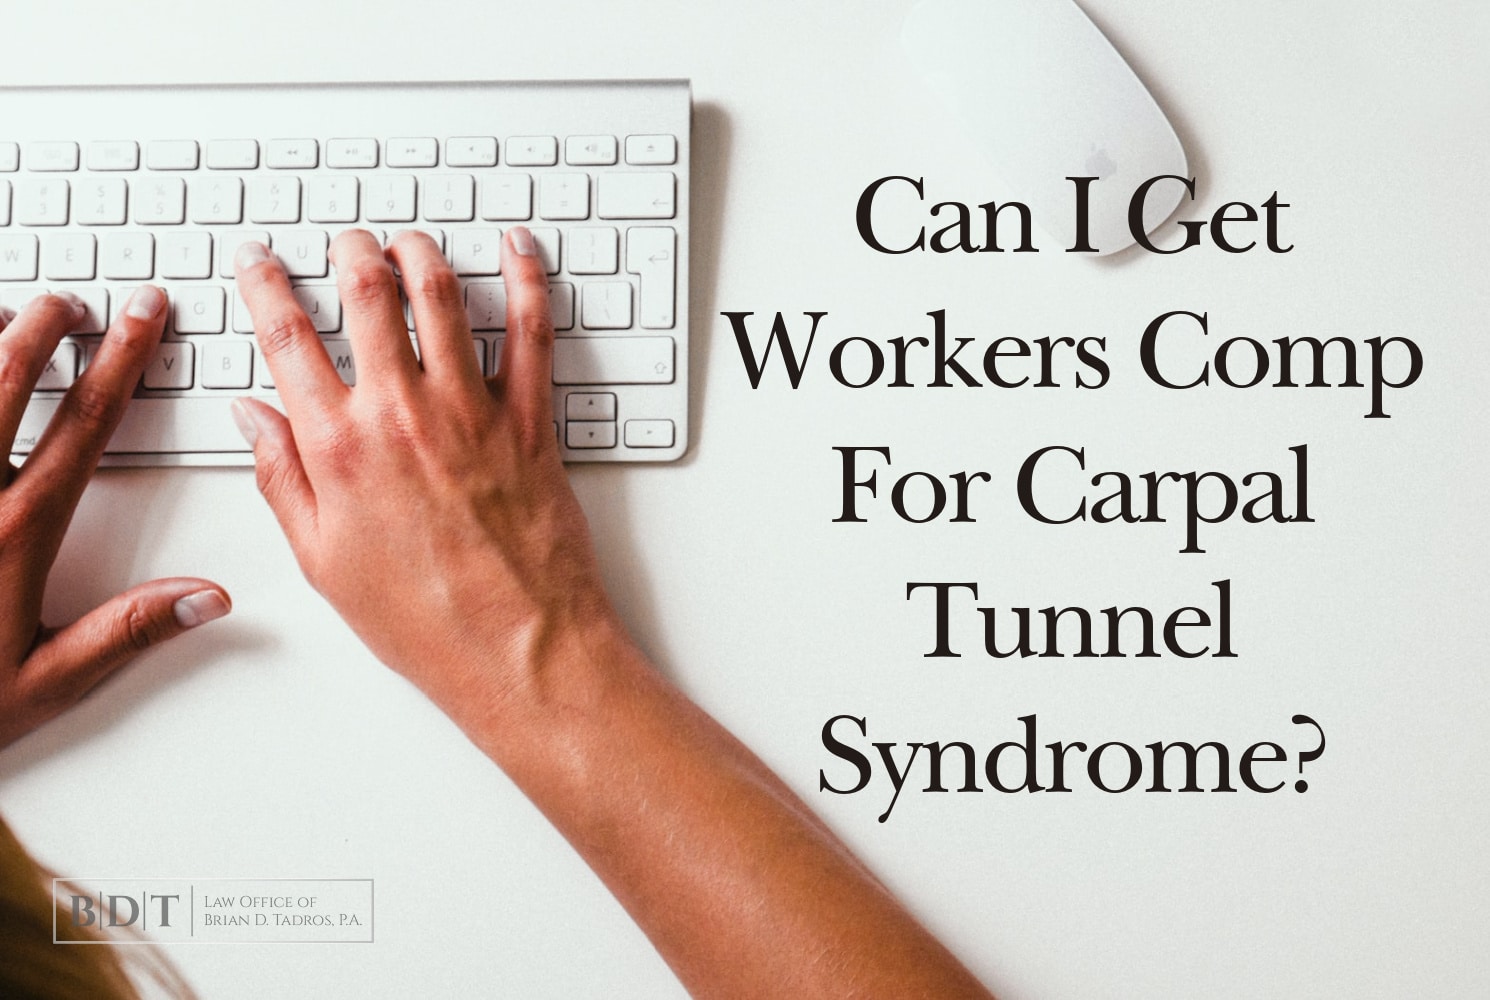 https://bdtlawfirm.com/wp-content/uploads/2020/12/workers-comp-for-carpal-tunnel.jpg